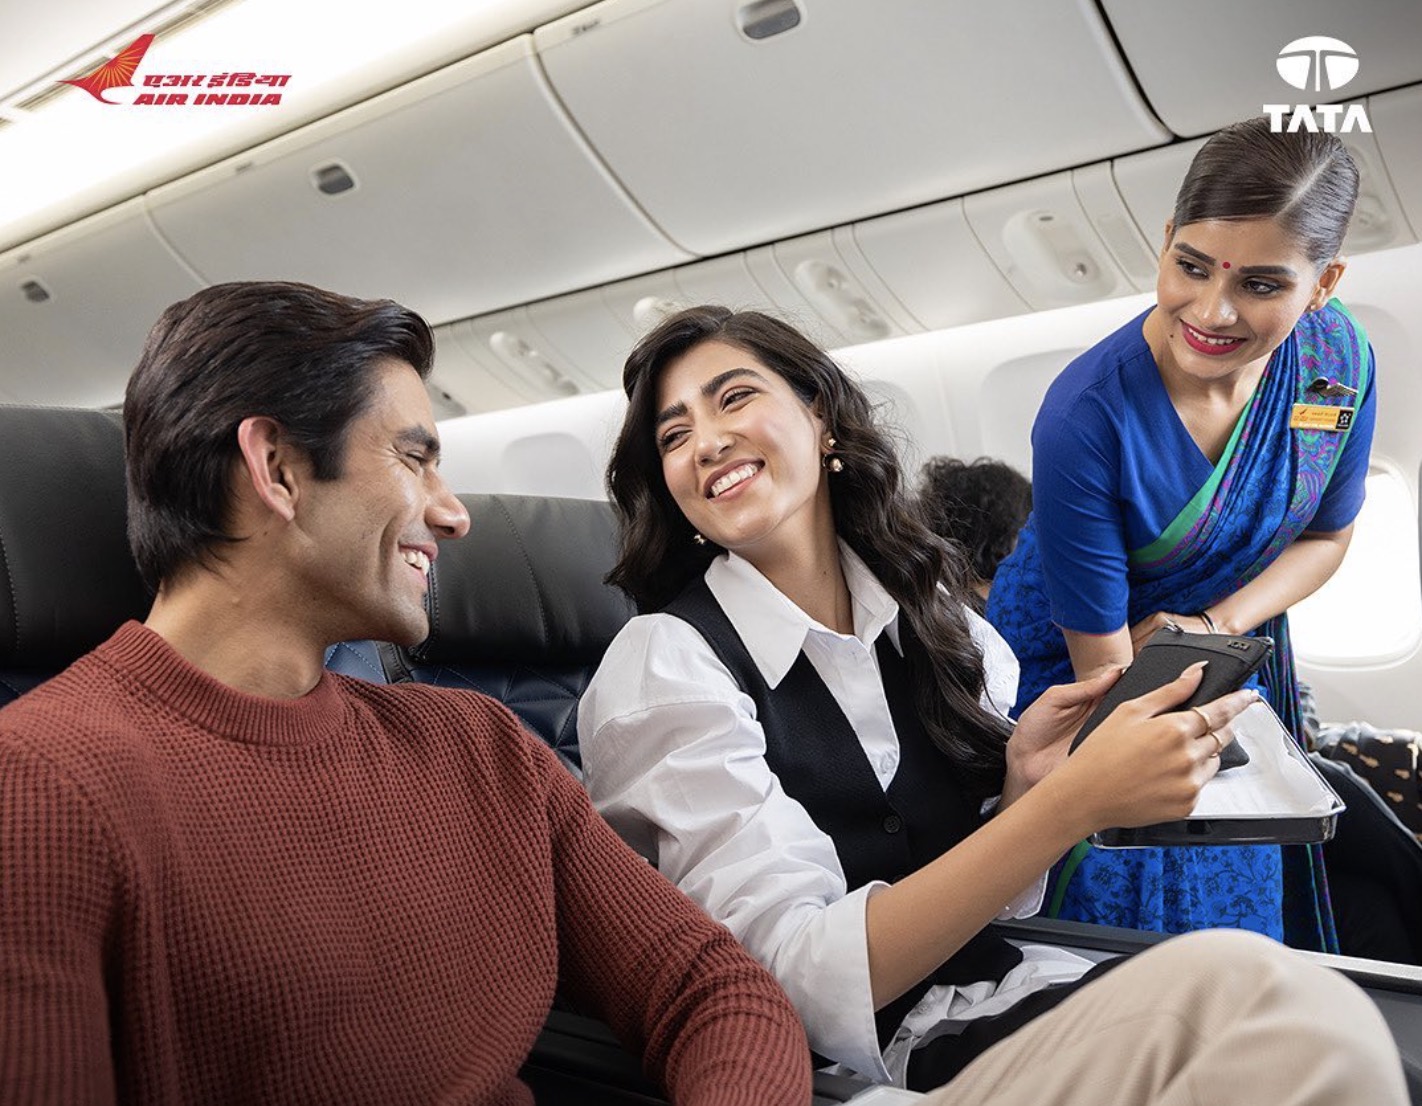 Does Air India Offer In-Flight Wifi Services for Passengers?